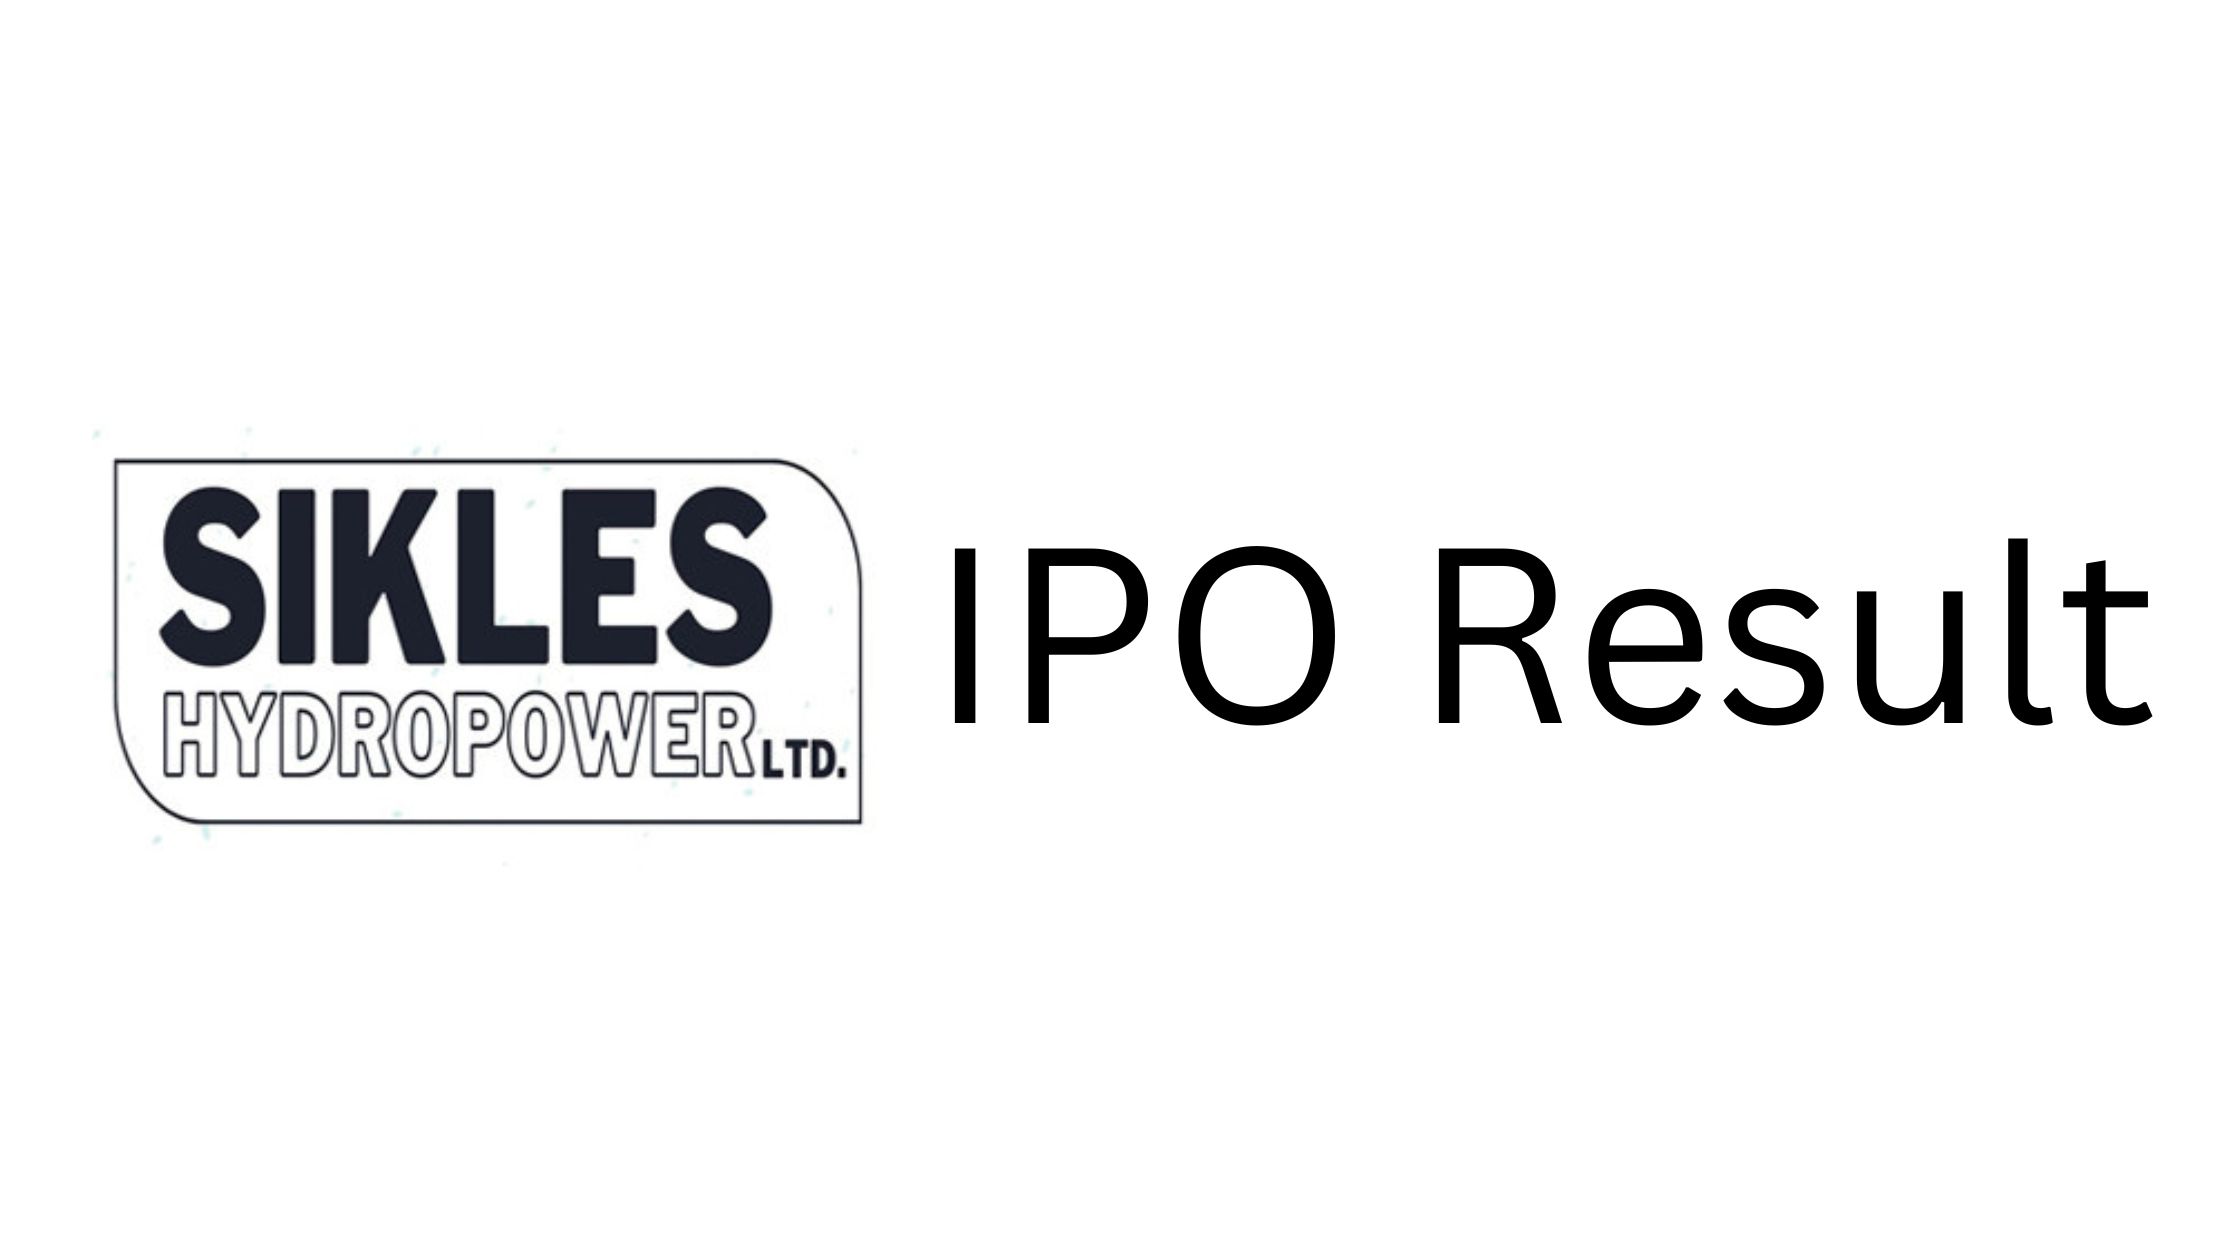 Check Sikles Hydropower IPO Result